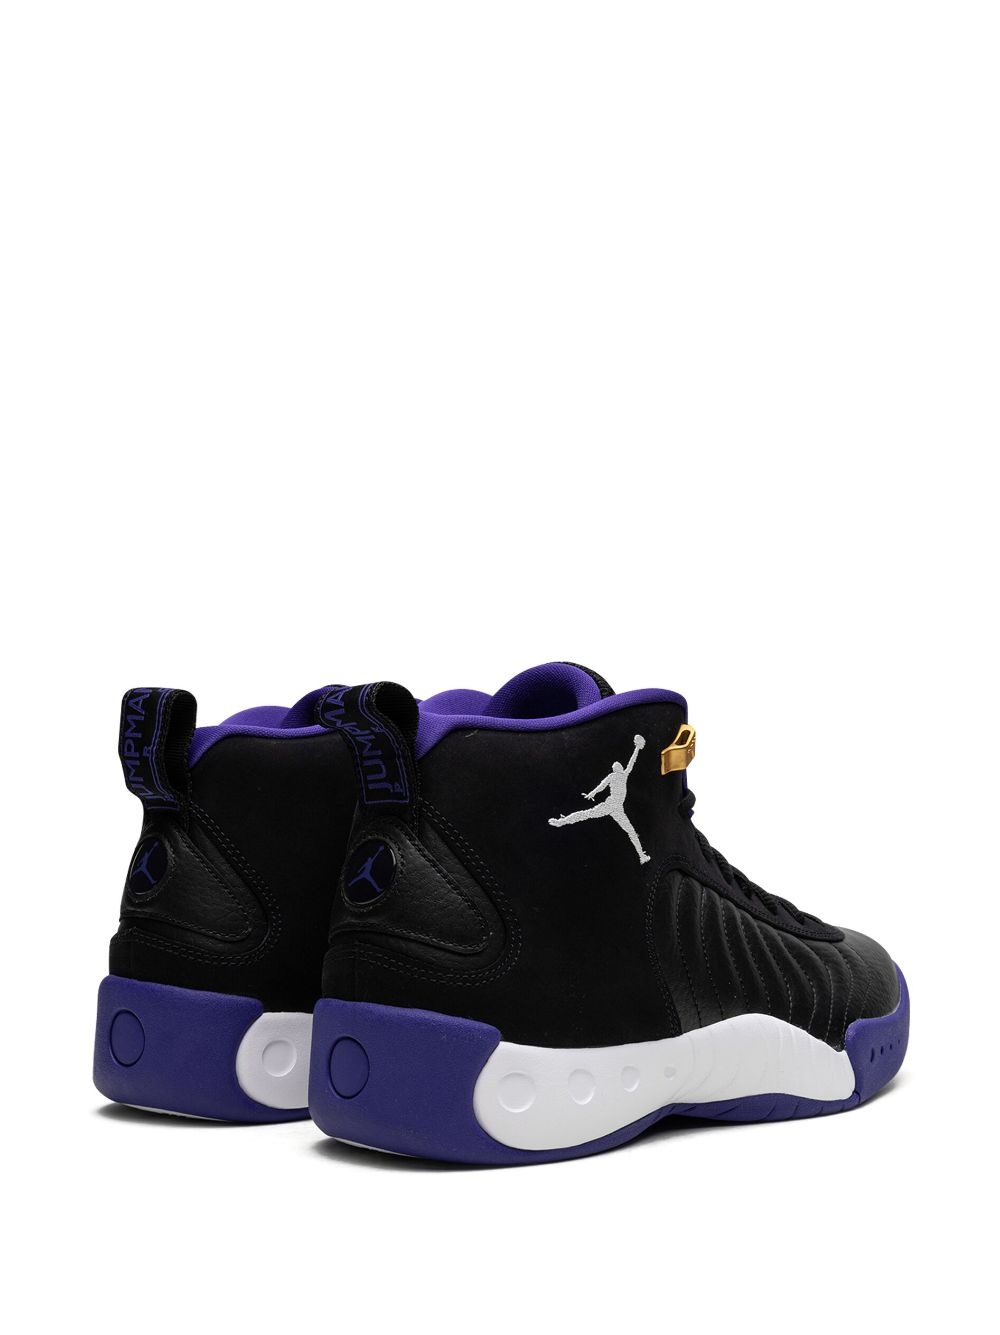 Jumpman Pro "Concord" sneakers - 3